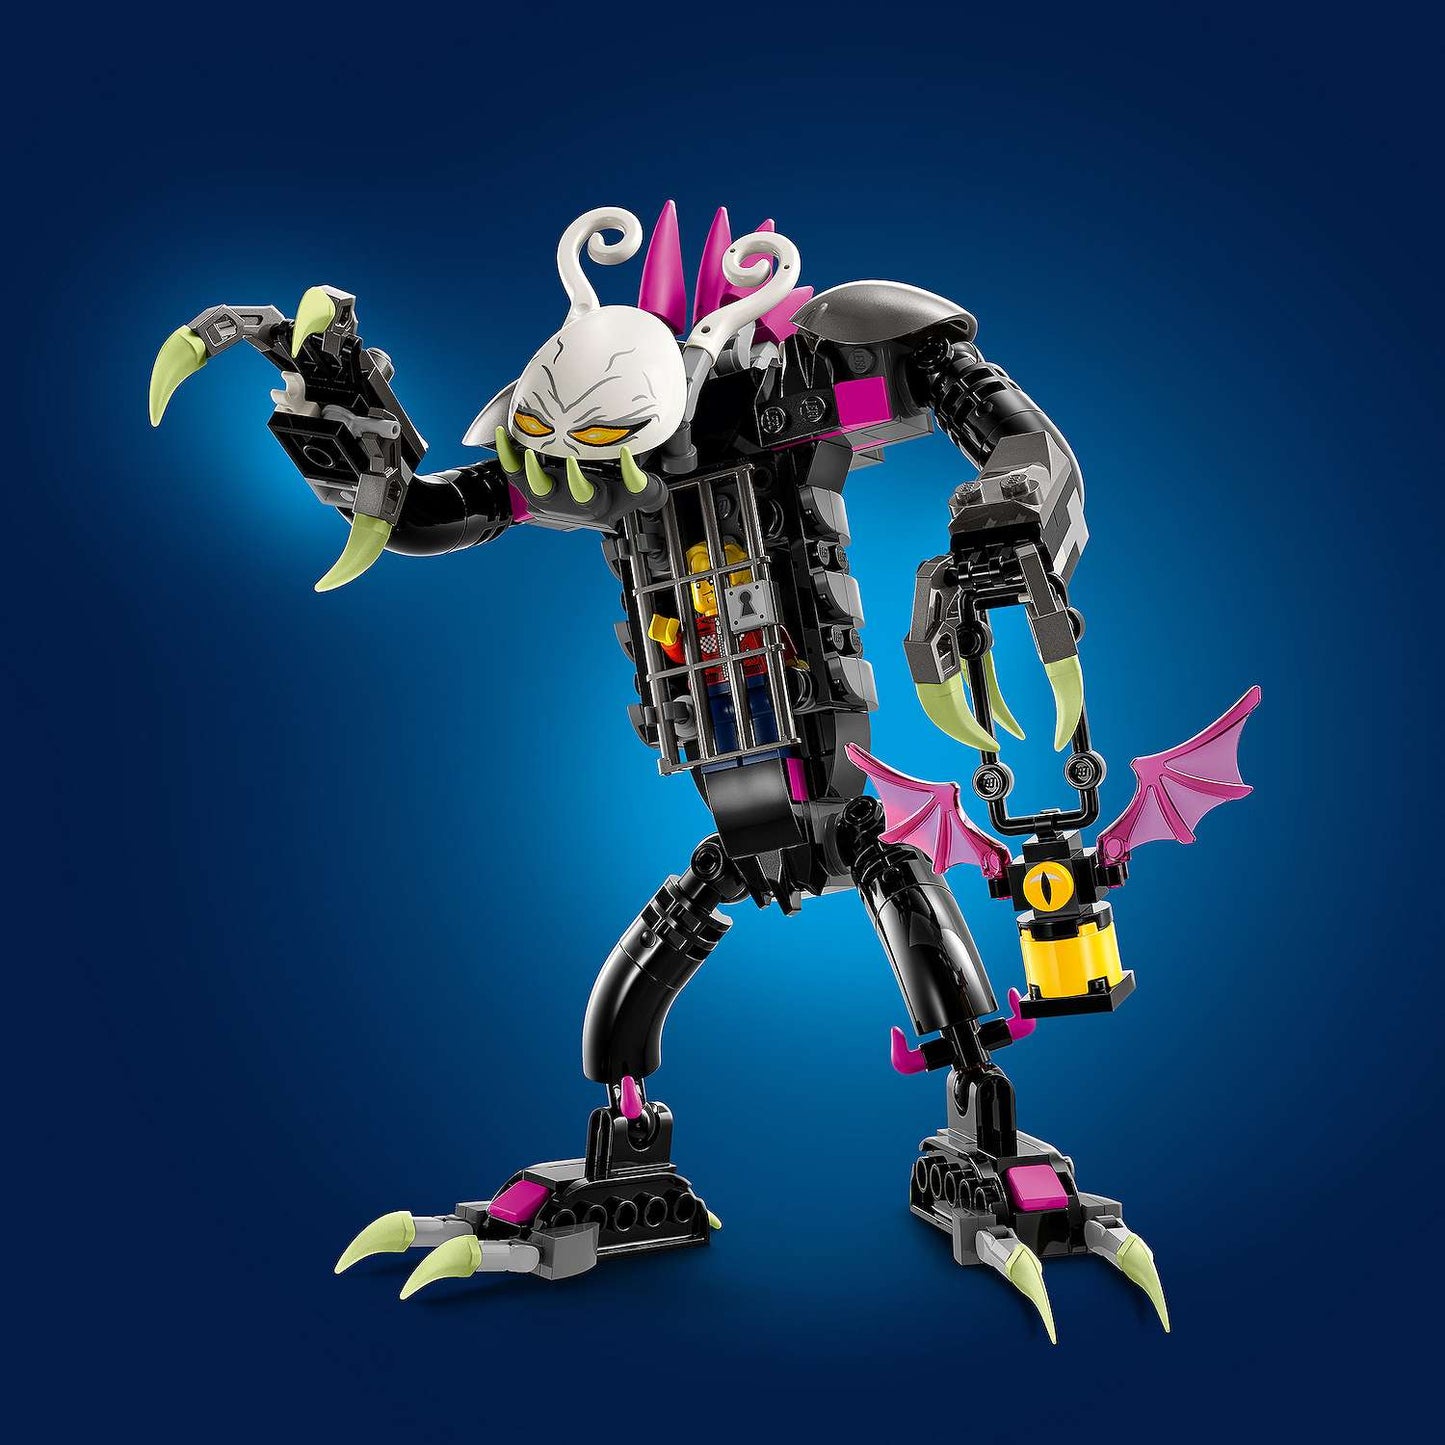 LEGO® DREAMZzz Grimkeeper the Cage Monster 71455 (274 Pieces)